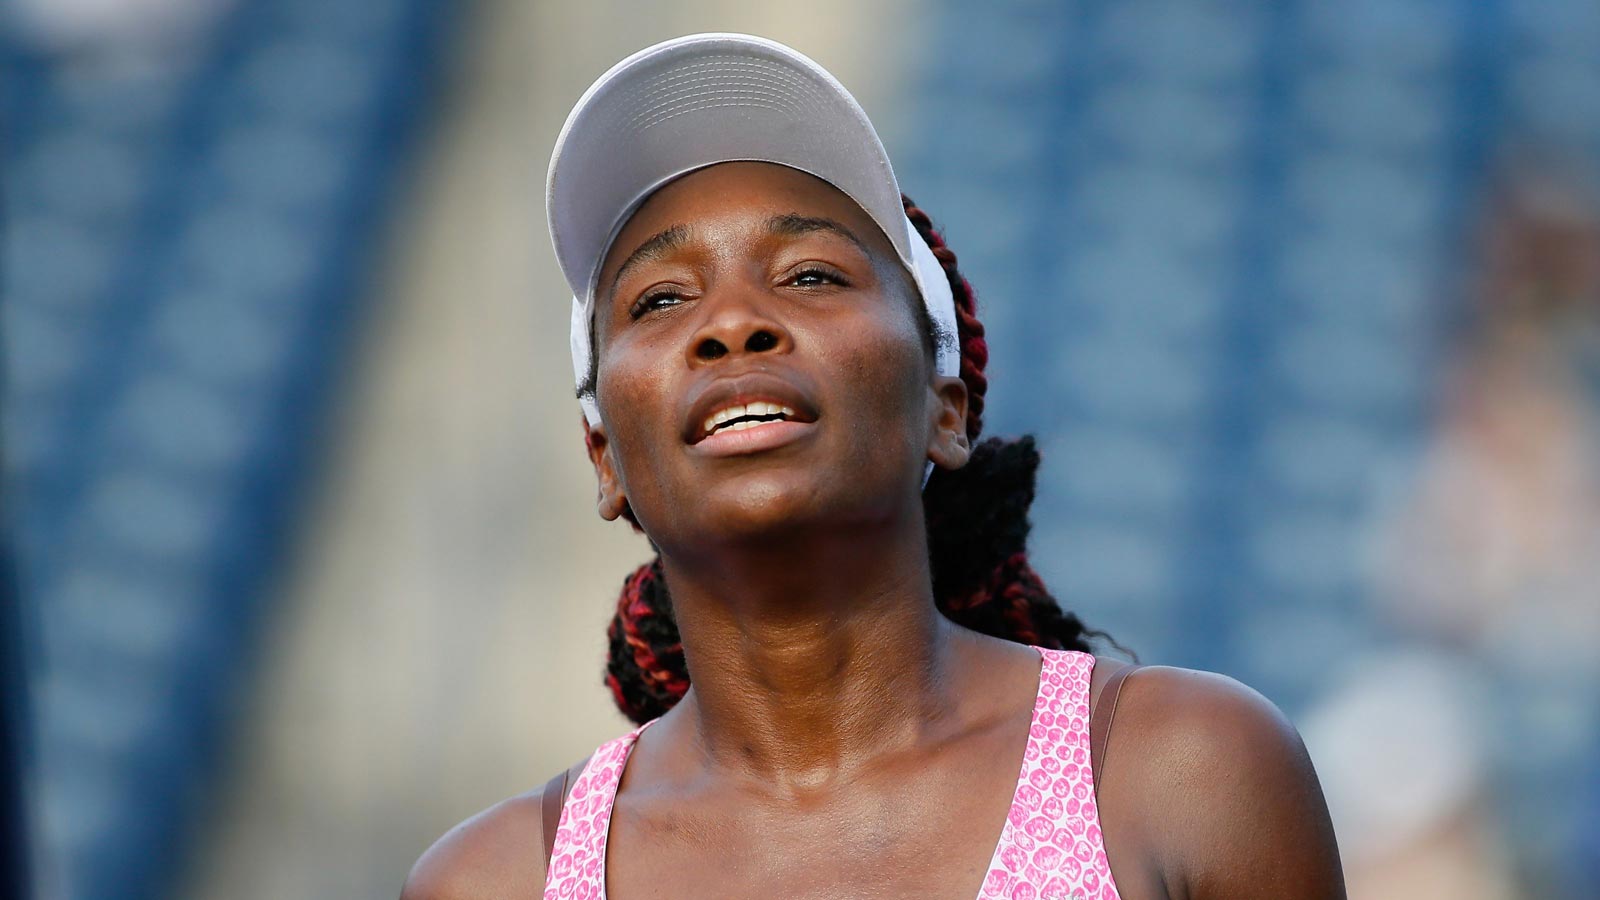 Oh, Yes! That’s NAKED Venus Williams Posing For ESPN Magazine [LOOK] - The Trent